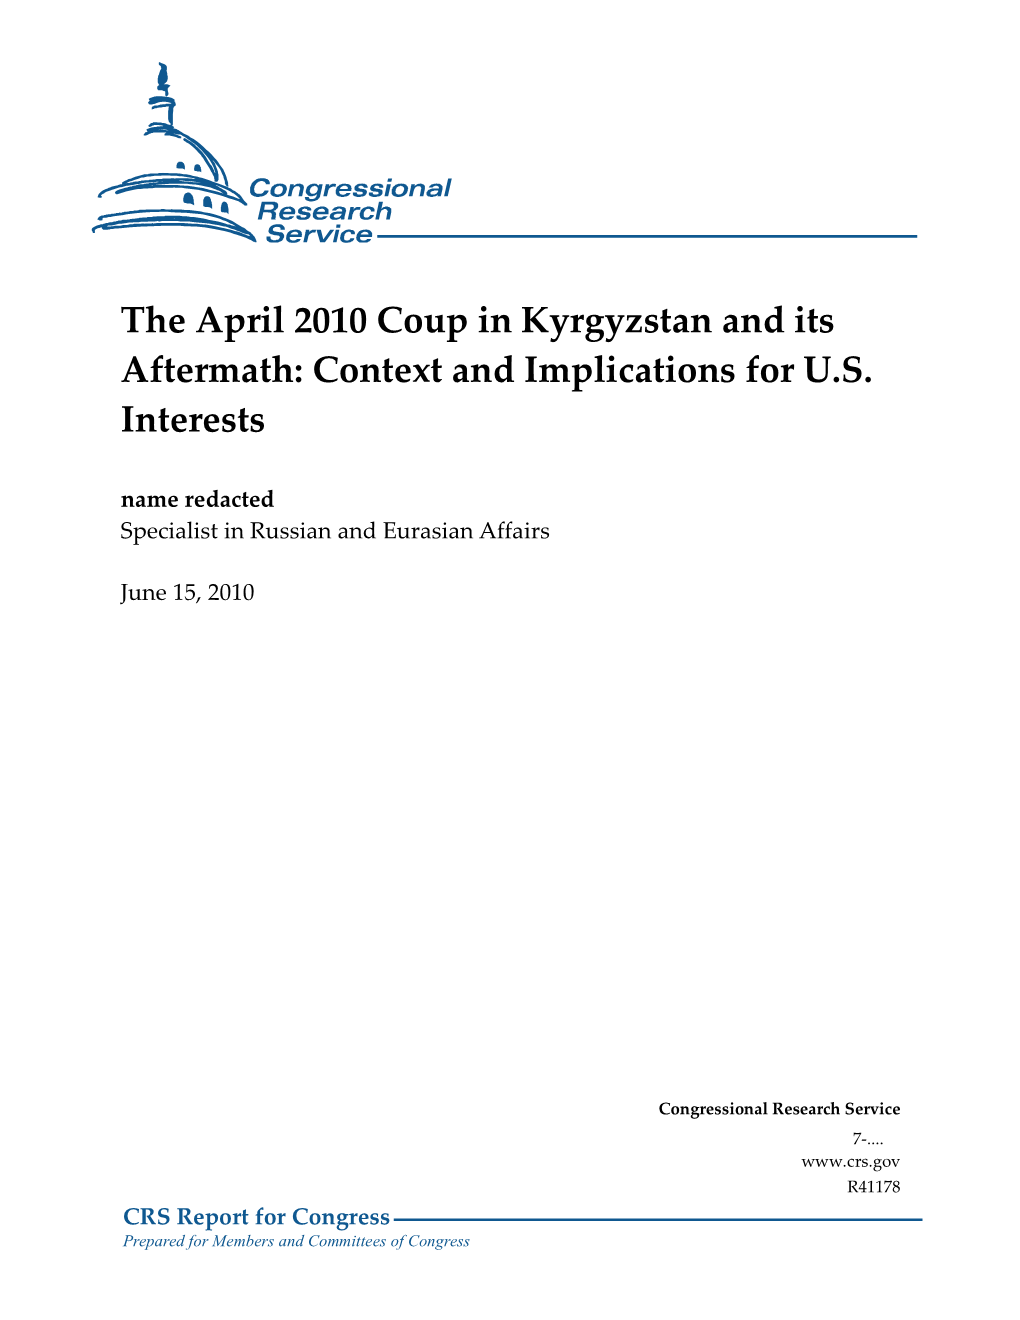 The April 2010 Coup in Kyrgyzstan and Its Aftermath: Context and Implications for U.S